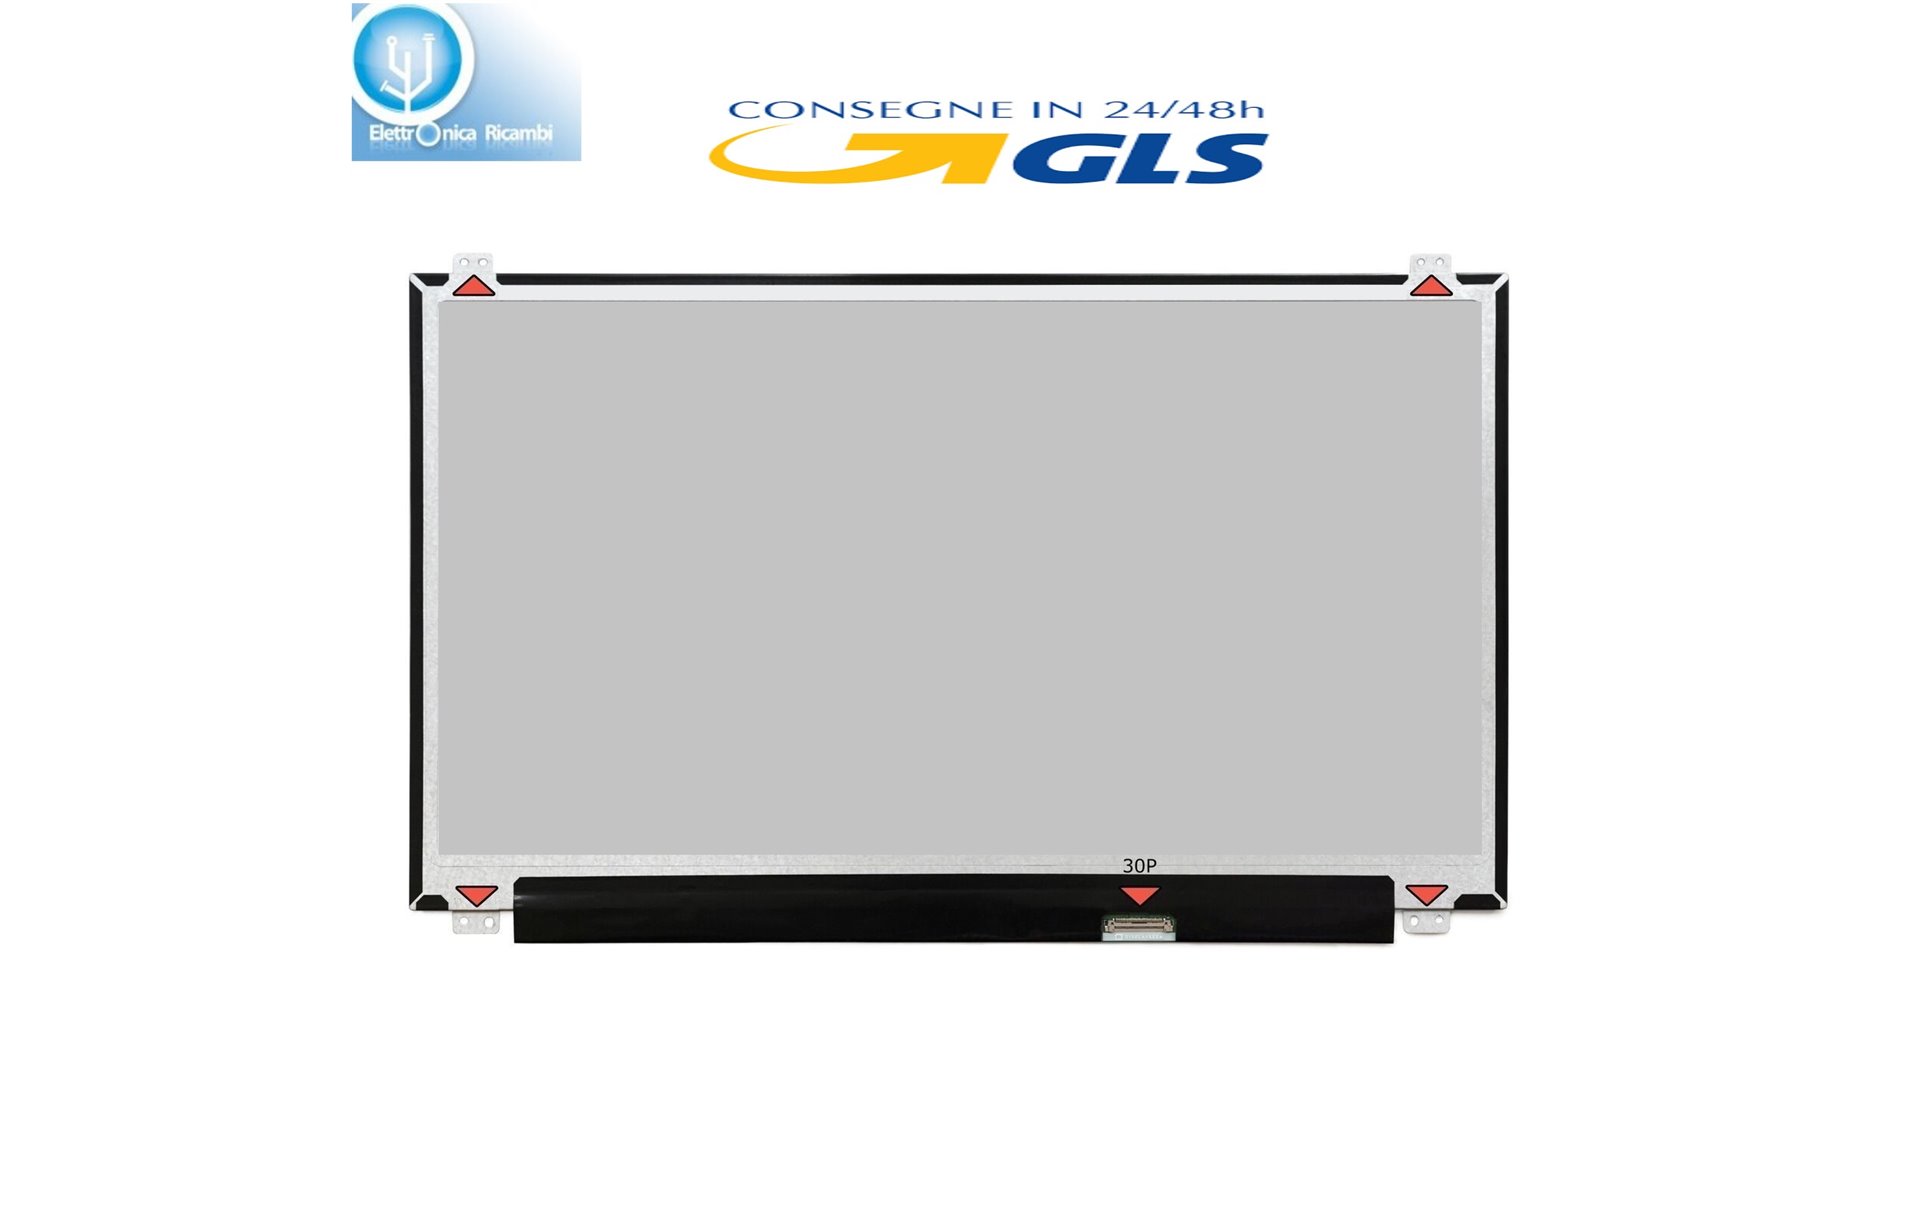 DISPLAY LCD Acer ASPIRE N17Q2 15.6 WideScreen (13.6"x7.6") LED"